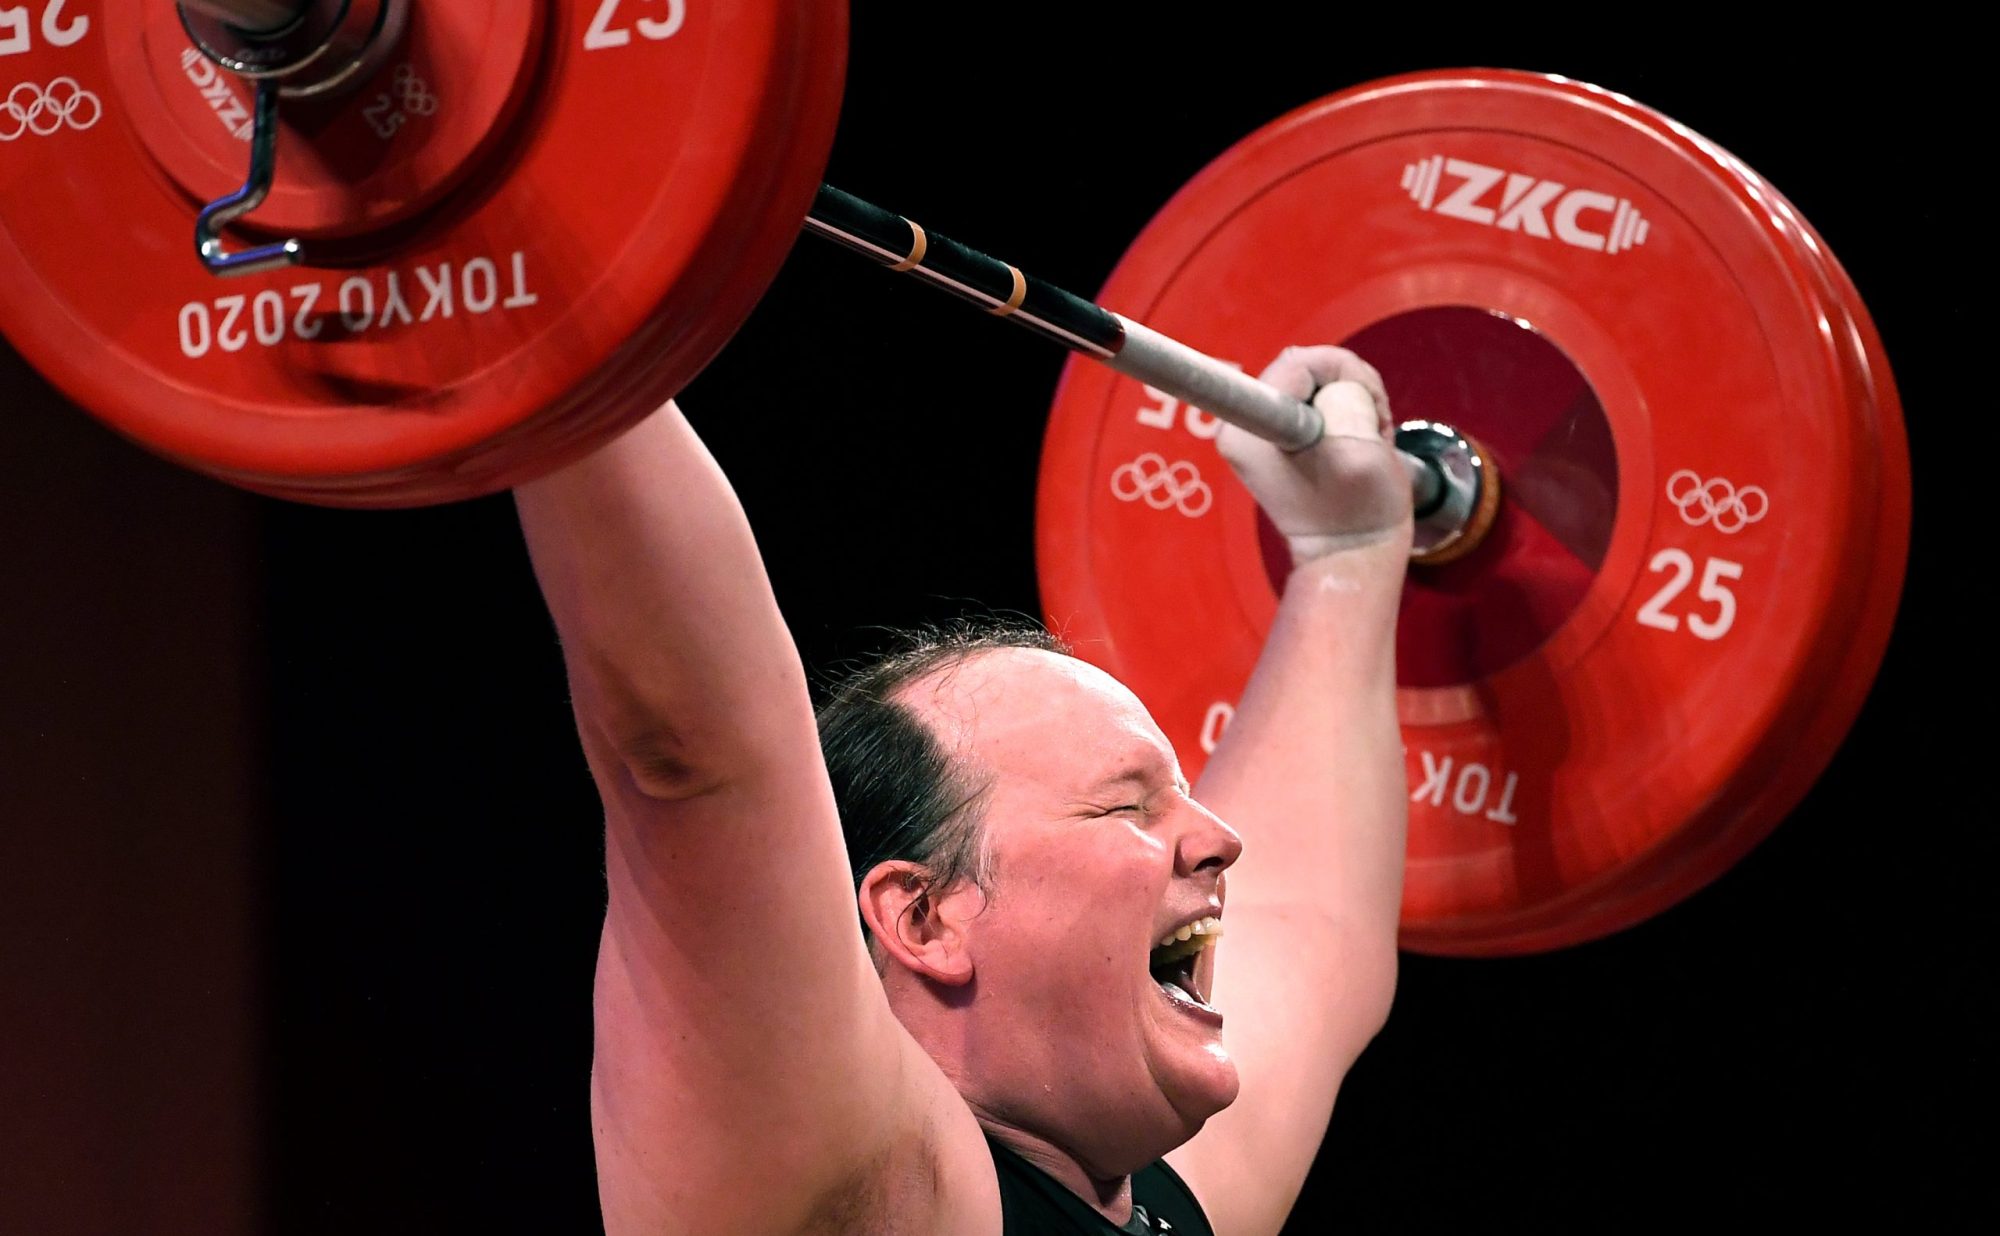 New Zealand's Laurel Hubbard, the first transgender Olympian, can't make the lift on his final try in the women's 87kg weightlifting final at the 2020 Tokyo Olympics. Wally Skalij /Los Angeles Times via Getty Images